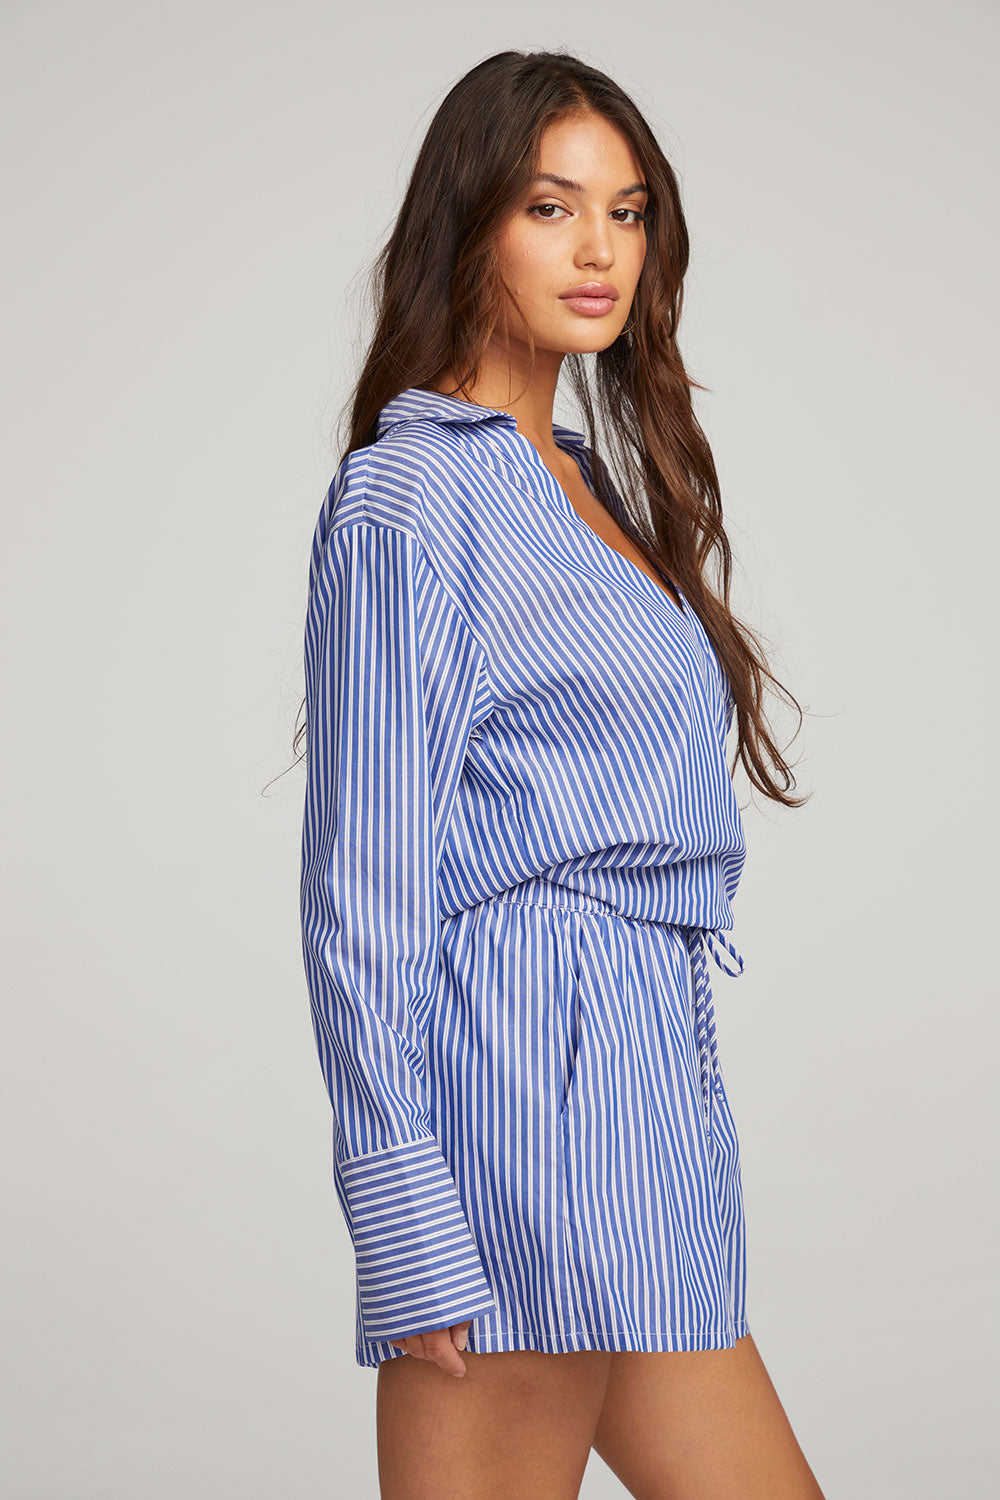 Chaser ‘Hailey Blouse’